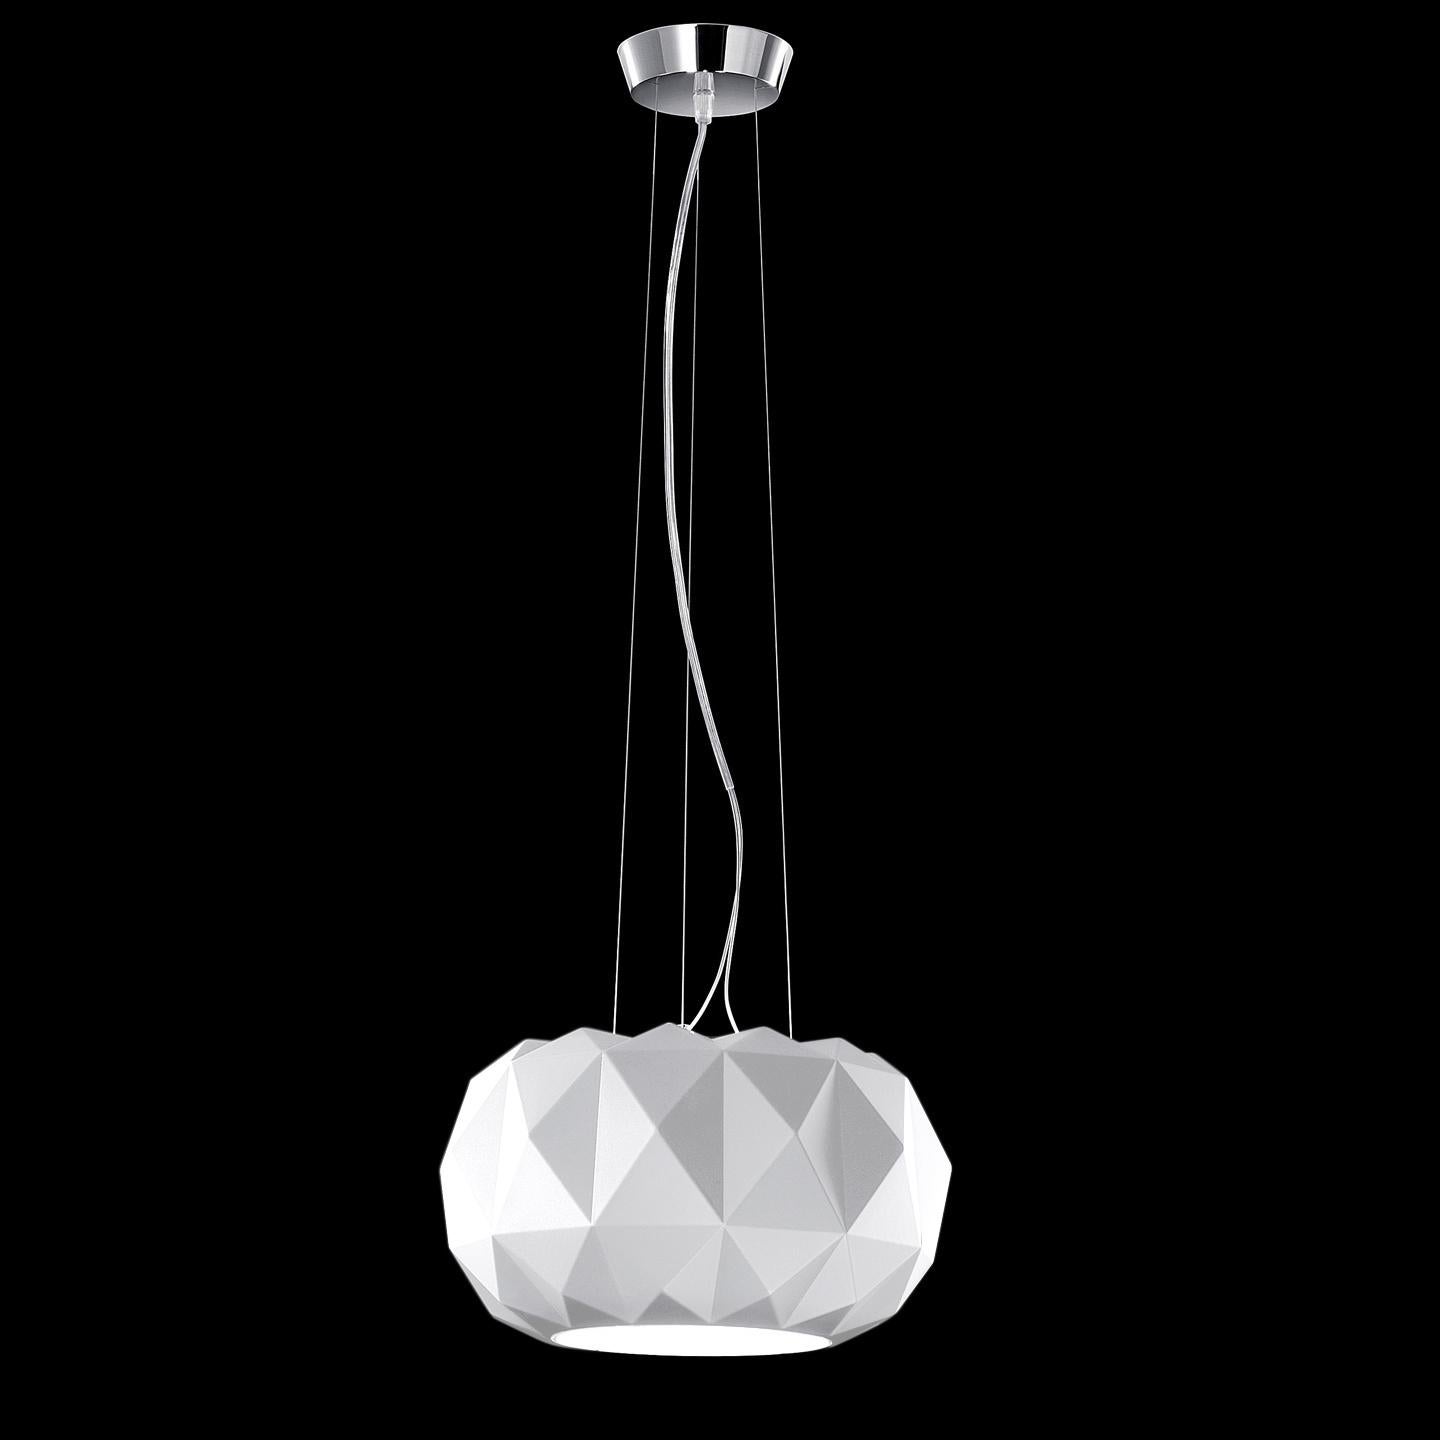 Leucos Deluxe S 35 Pendant Light in Satin White and Chrome by Archirivolto For Sale